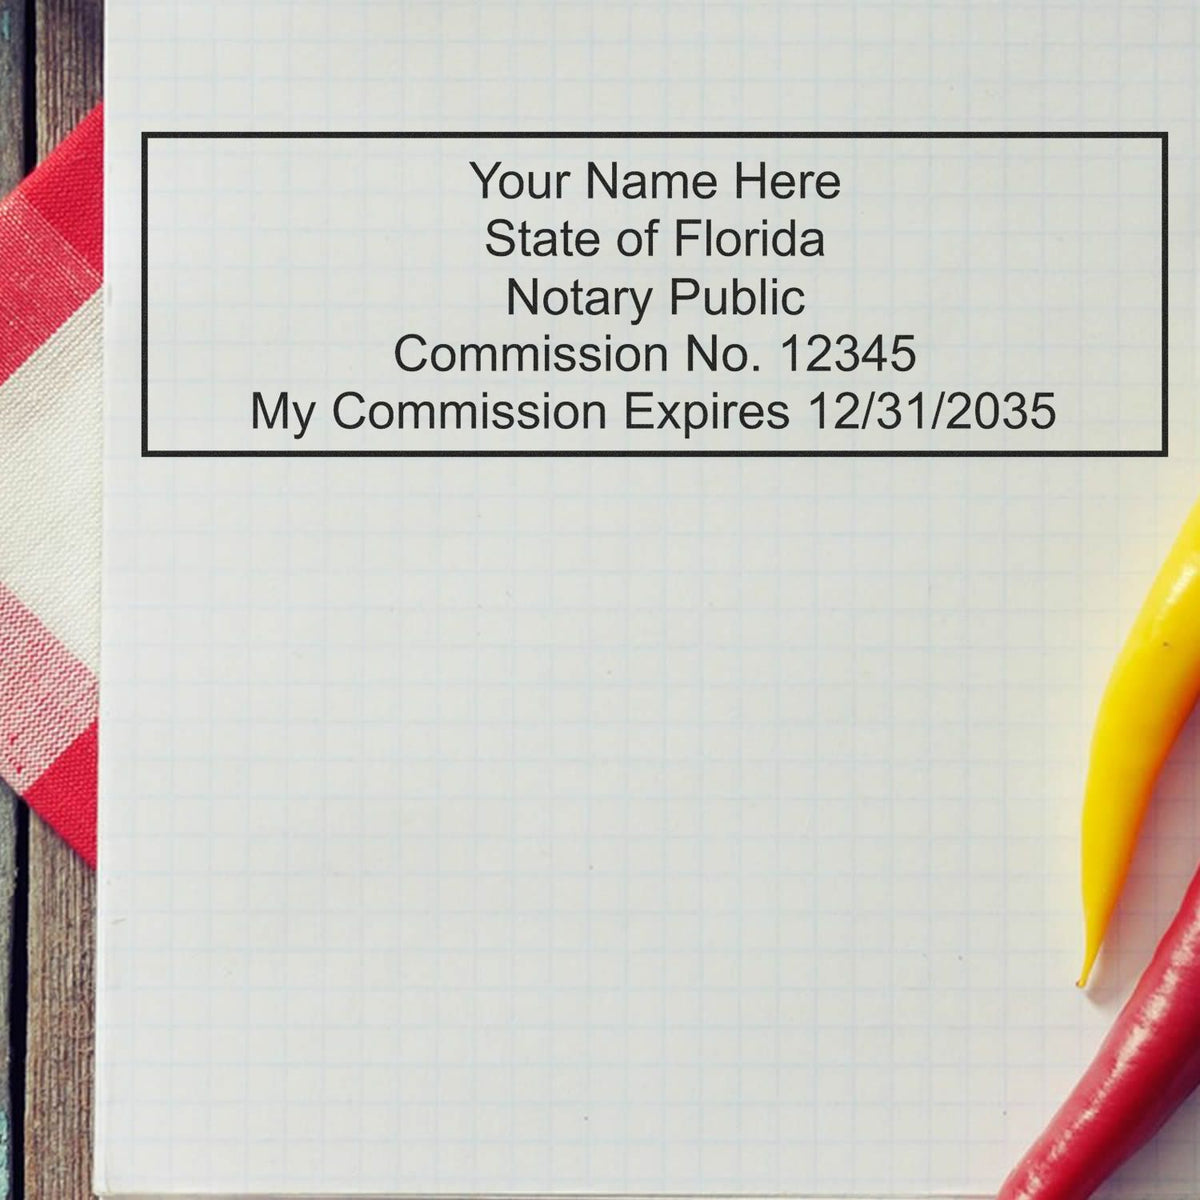 The Heavy-Duty Florida Rectangular Notary Stamp stamp impression comes to life with a crisp, detailed photo on paper - showcasing true professional quality.